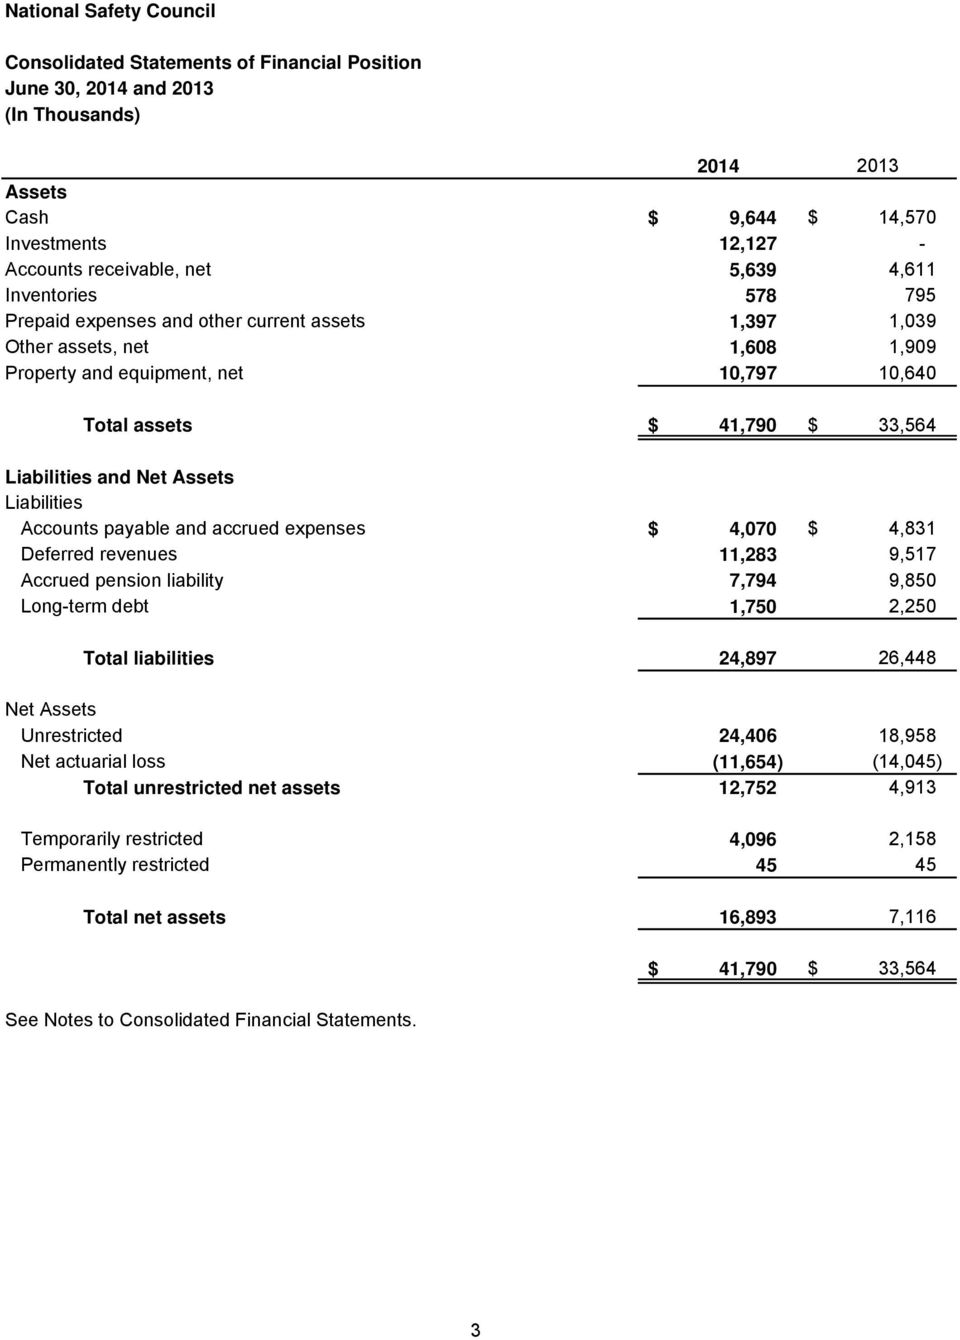 payable and accrued expenses $ 4,070 $ 4,831 Deferred revenues 11,283 9,517 Accrued pension liability 7,794 9,850 Long-term debt 1,750 2,250 Total liabilities 24,897 26,448 Net Assets Unrestricted